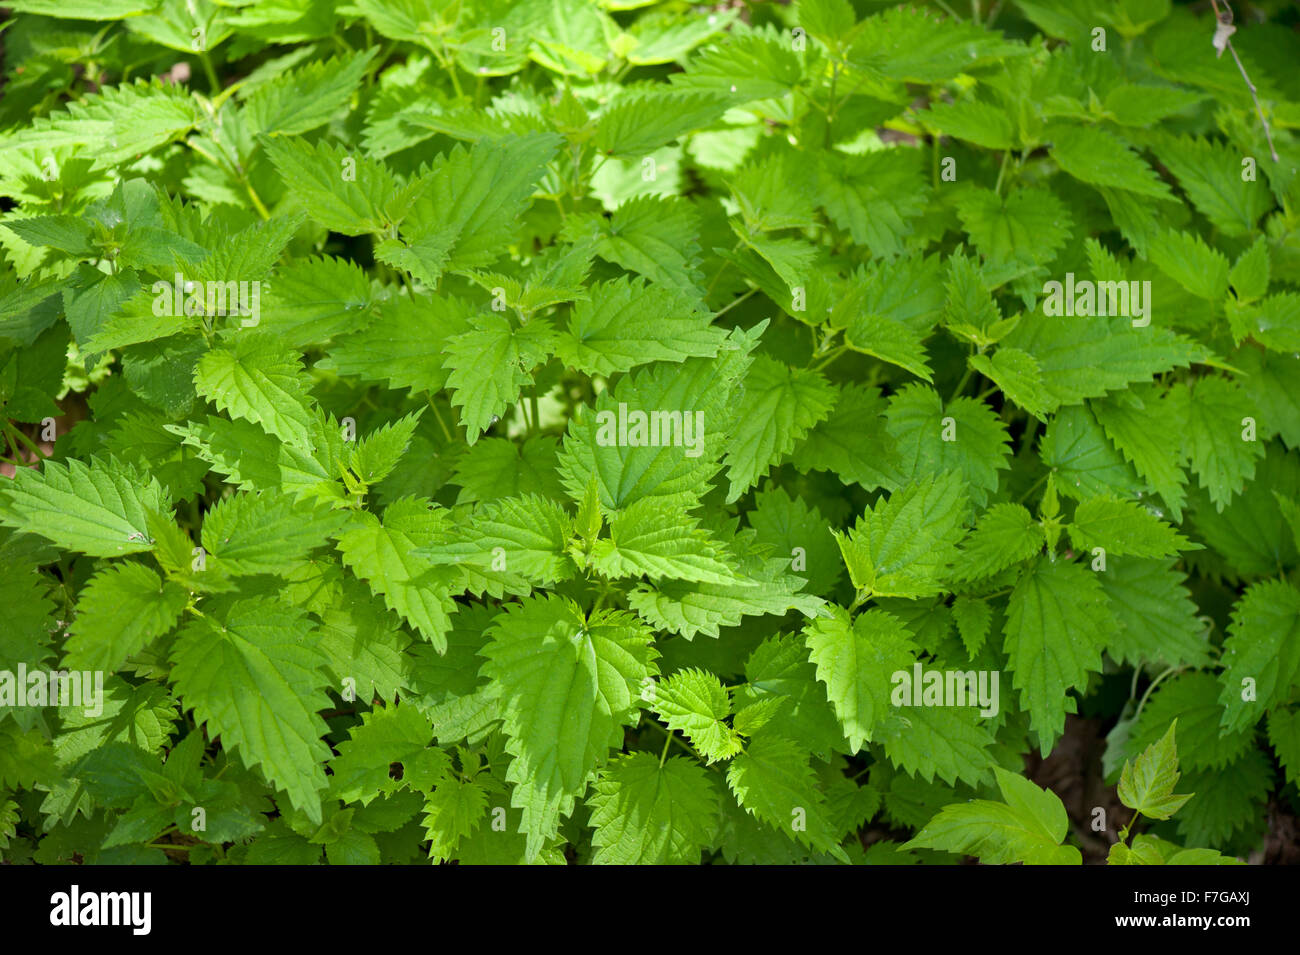 Stinging nettle fresh foliage, Urtica dioica herbaceous perennial plants grow in Poland, Europe, green leaves on tips, medicinal Stock Photo